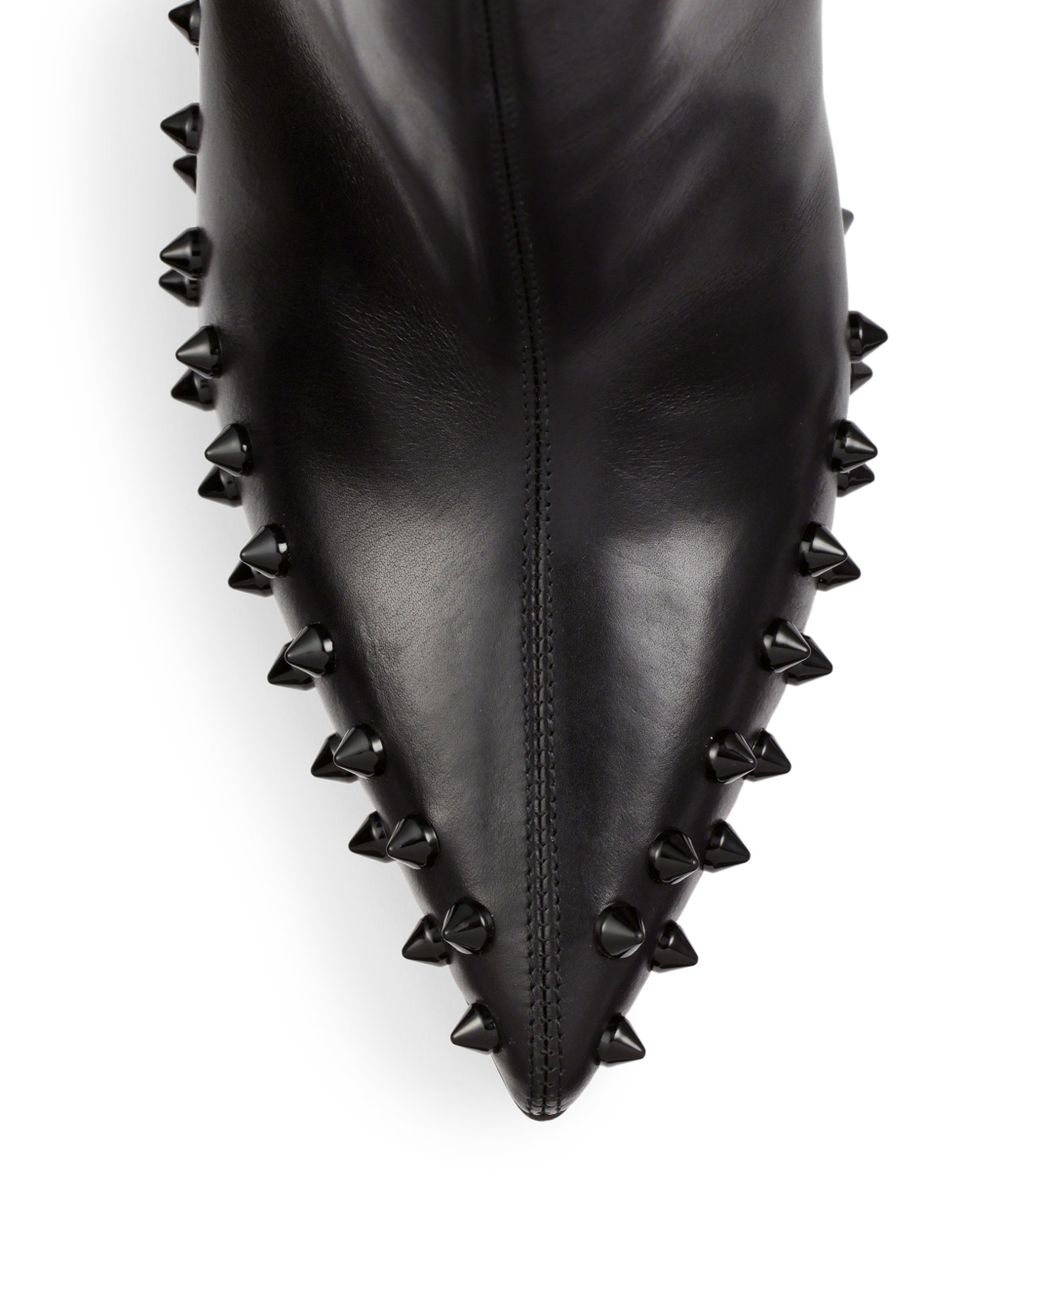 Christian Louboutin // Grey Suede Willeta 100 Spiked Bootie – VSP